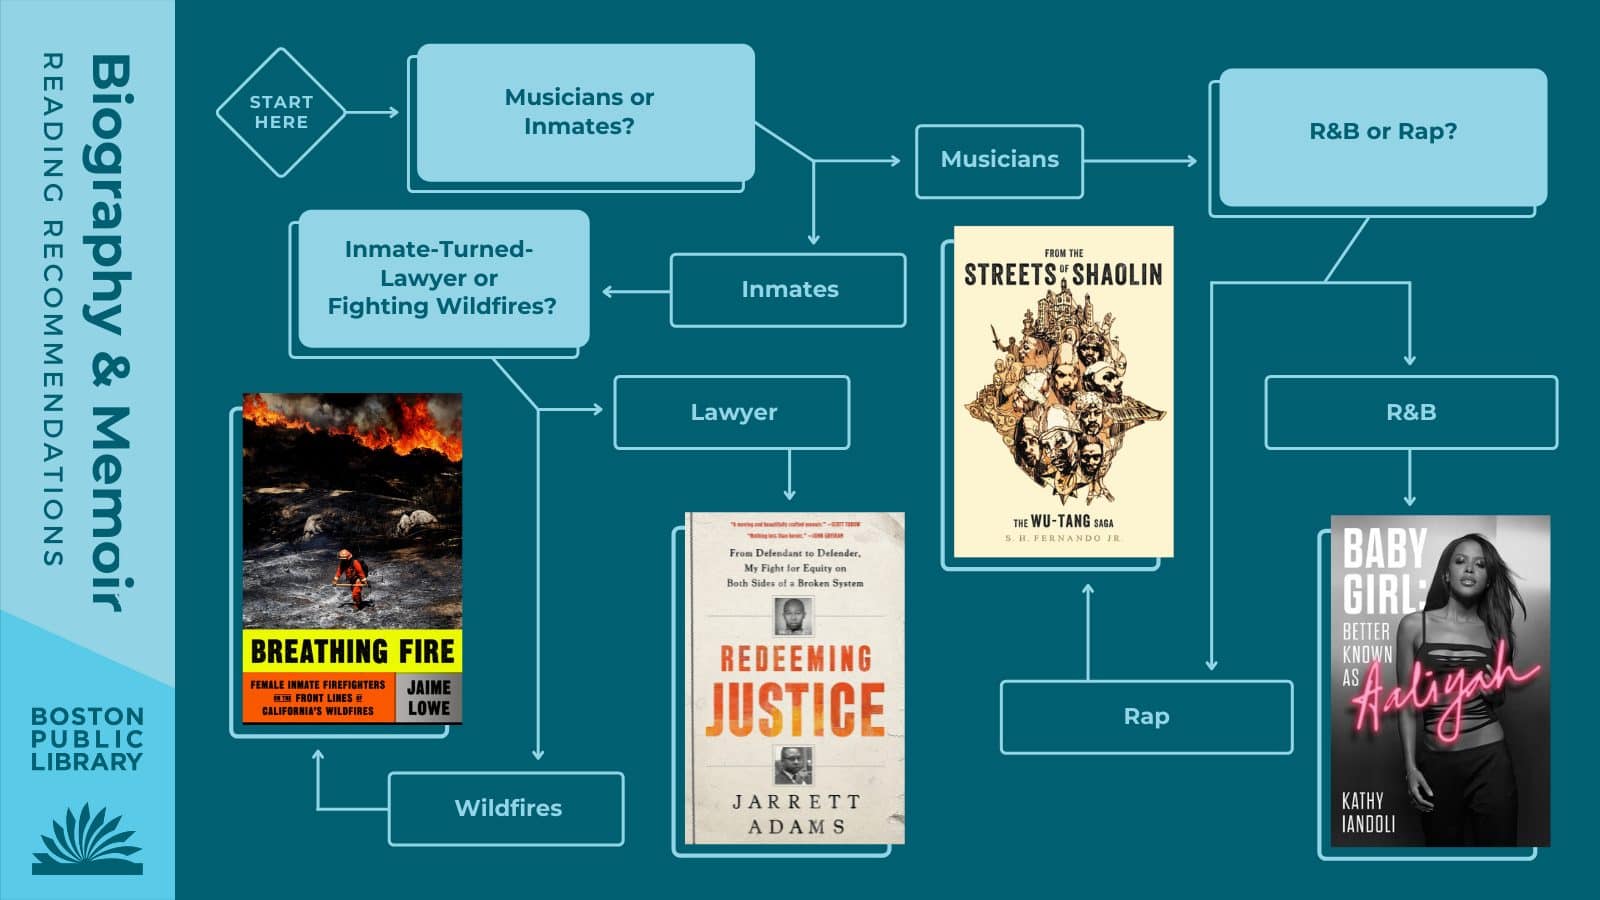 Q1: Musicians or Inmates? Musicians → Q2: R&B or Rap? R&B: Baby Girl by Kathy Iandoli, Rap: From the Streets of Shaolin by S.H. Fernando | Inmates → Q3: Inmate-turned-lawyer or female inmates fighting wildfires? Lawyer: Redeeming Justice by Jarrett Adams, Fighting Fires: Breathing Fire by Jaime Lowe.